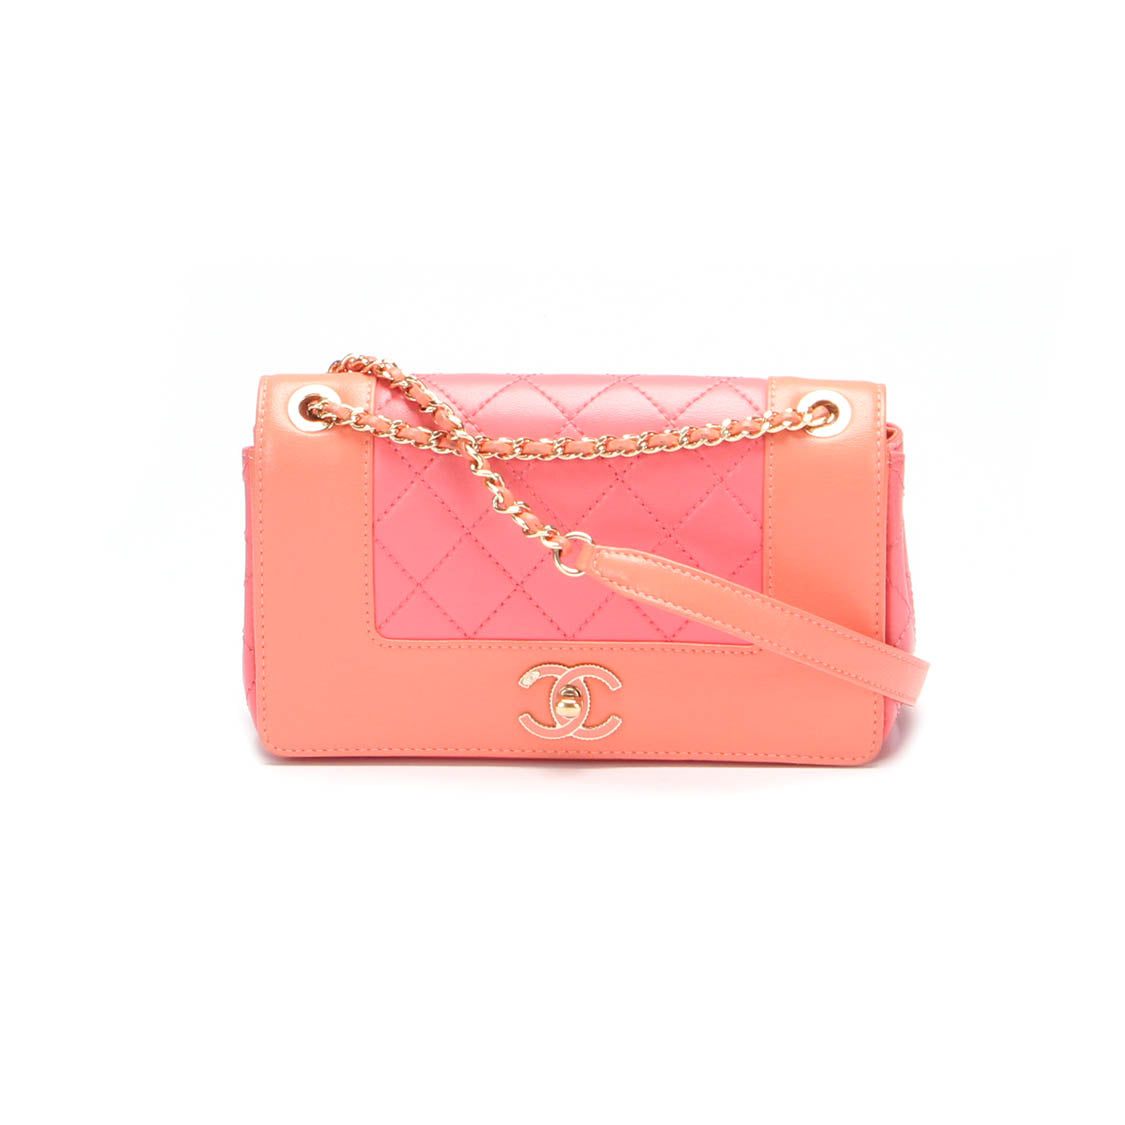 CC Quilted Mademoiselle Vintage Flap Bag